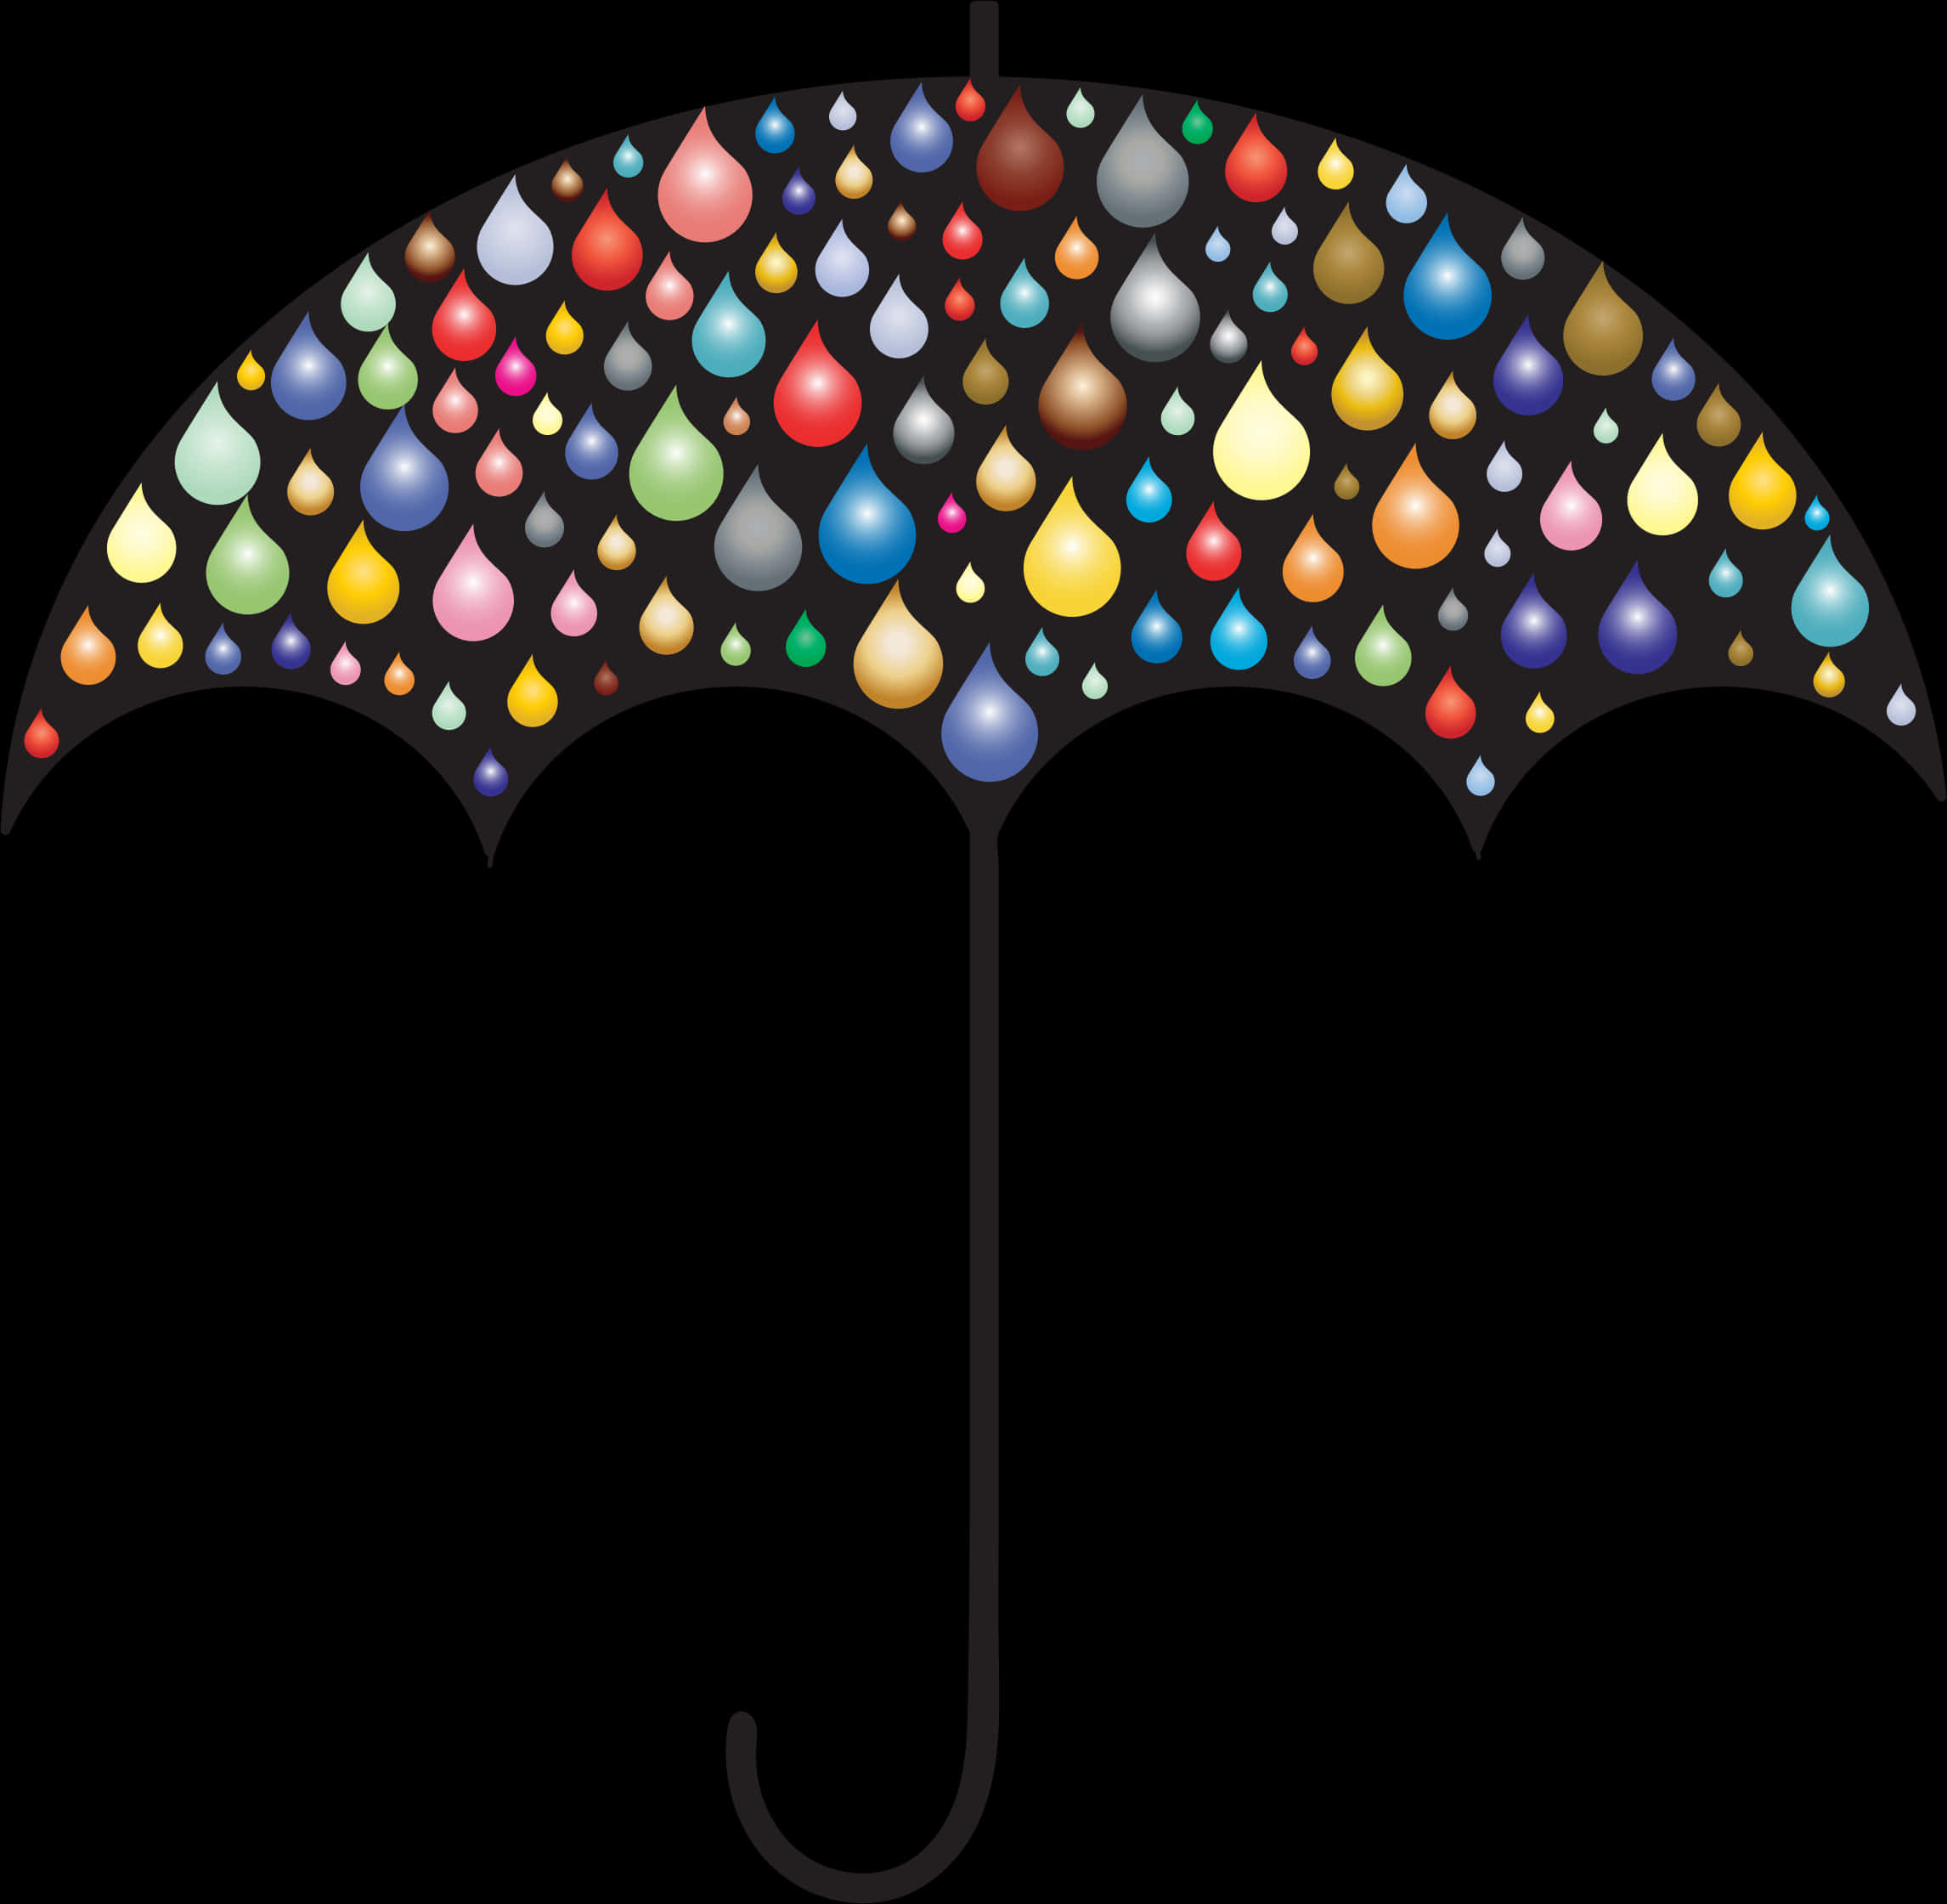 A Colorful Umbrella With Many Drops Of Water On It